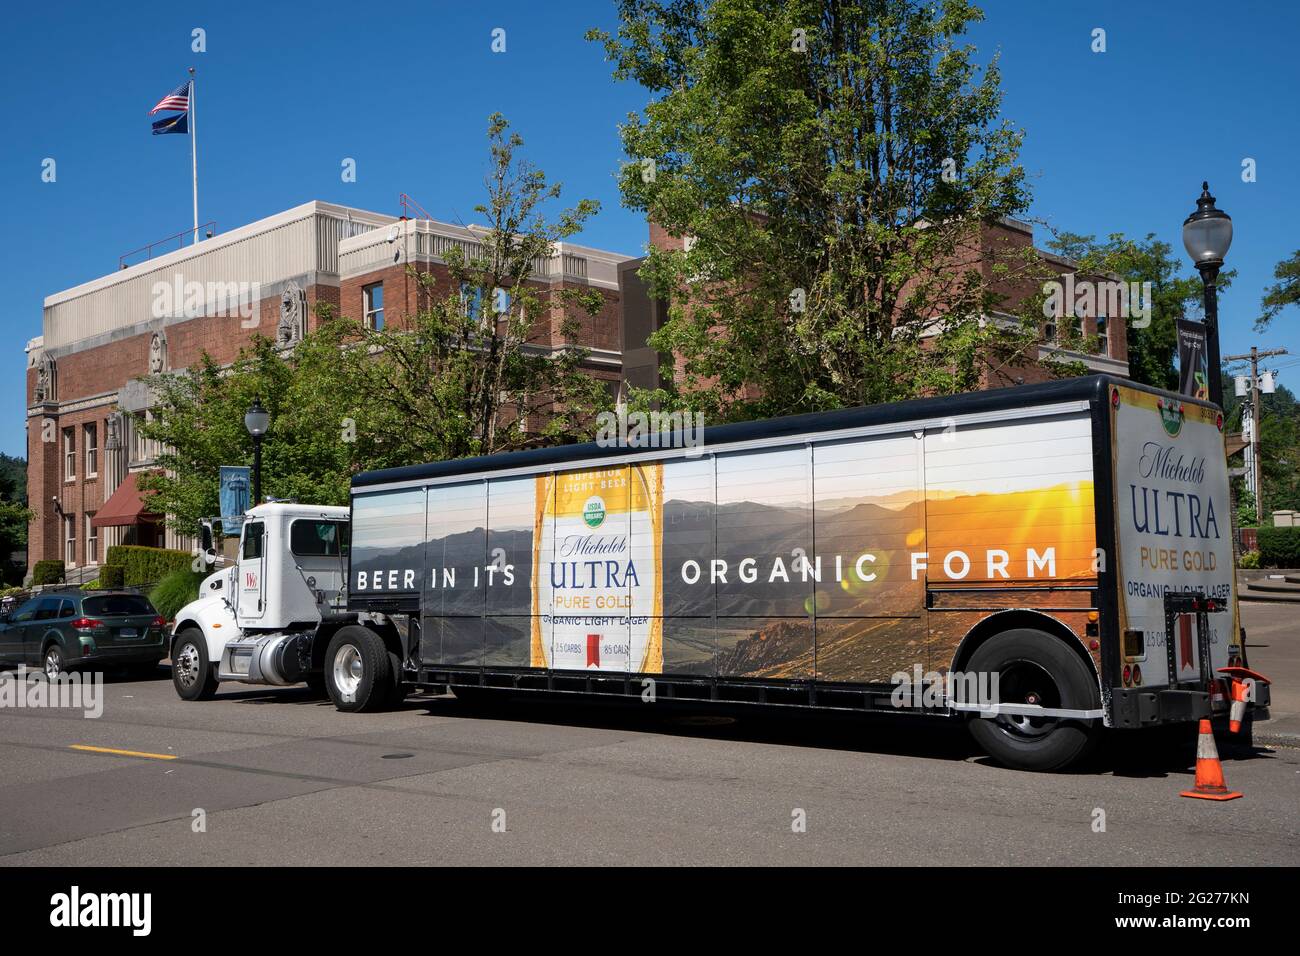 Michelob Ultra Pure Gold Organic Light Lager branded delivery truck is seen parked on the street in Oregon City, Oregon, on Thursday, June 3, 2021. Stock Photo